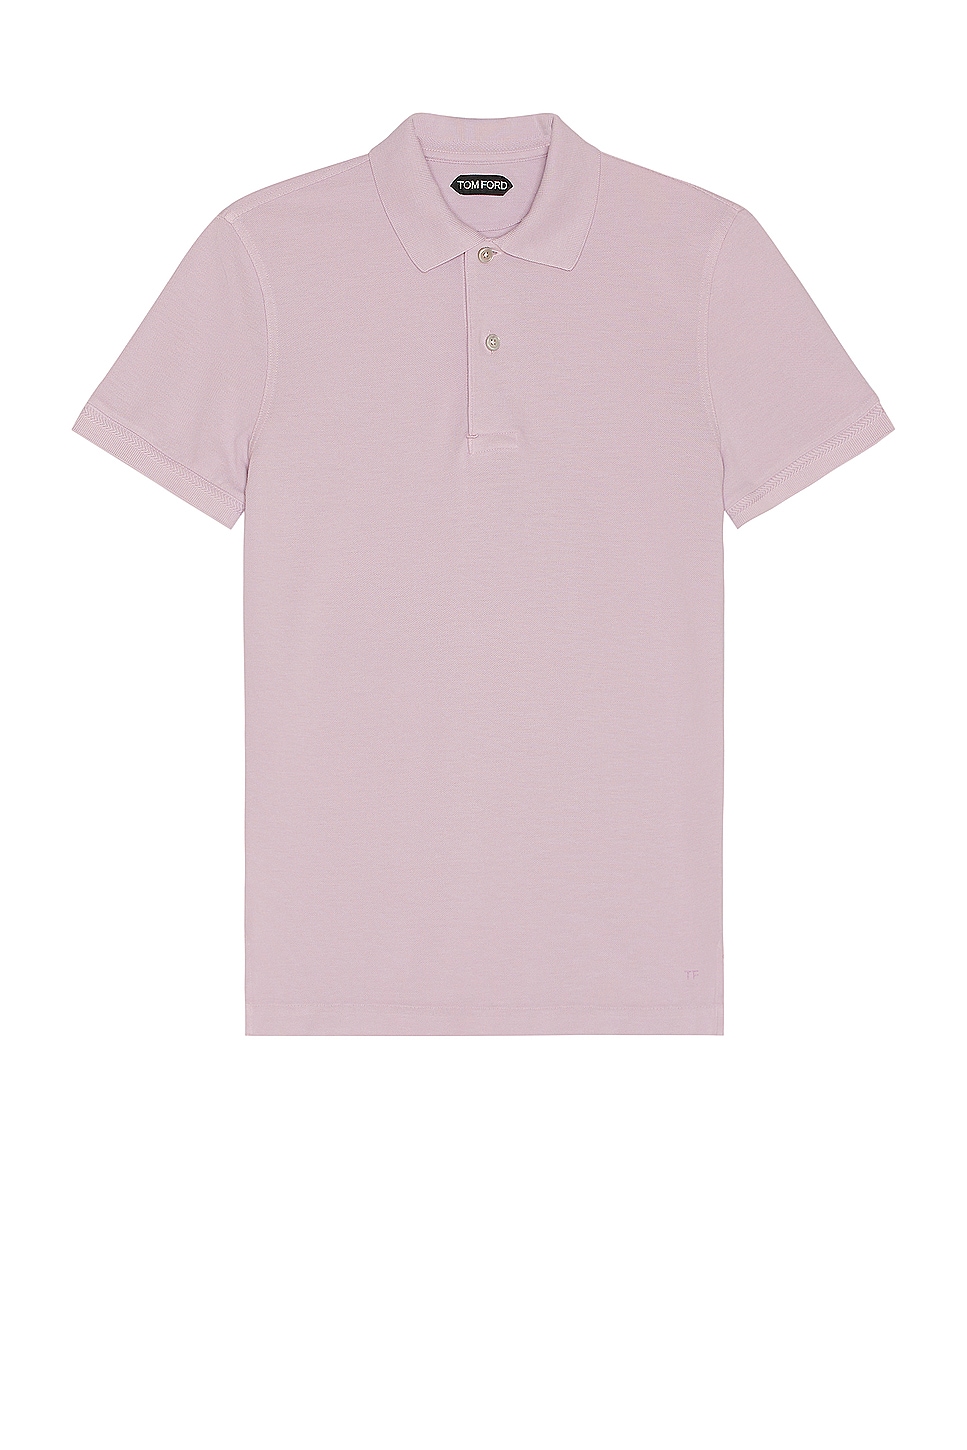 Image 1 of TOM FORD Tennis Piquet Polo in Light Lavender